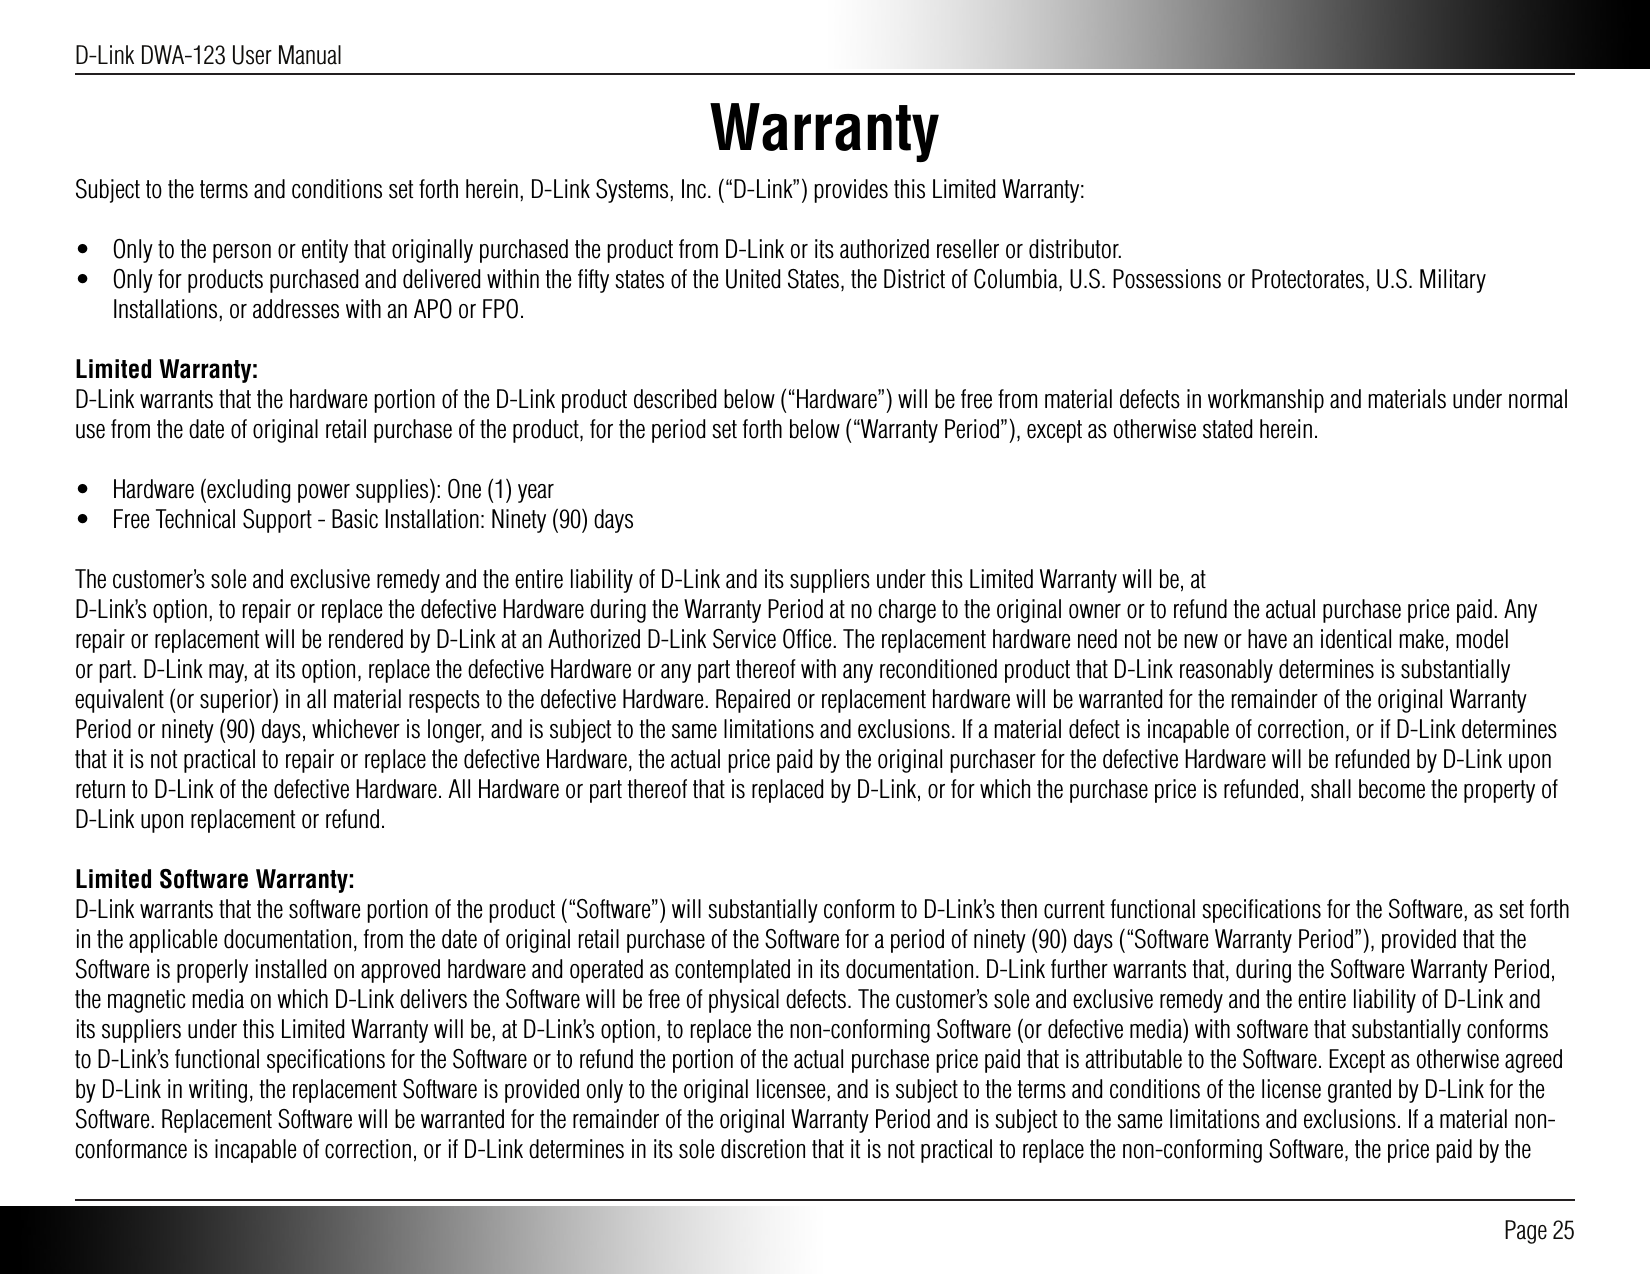 D-Link DWA-123 User Manual Page 25WarrantySubject to the terms and conditions set forth herein, D-Link Systems, Inc. (“D-Link”) provides this Limited Warranty:•  Only to the person or entity that originally purchased the product from D-Link or its authorized reseller or distributor.•  Only for products purchased and delivered within the ﬁfty states of the United States, the District of Columbia, U.S. Possessions or Protectorates, U.S. Military Installations, or addresses with an APO or FPO.Limited Warranty:D-Link warrants that the hardware portion of the D-Link product described below (“Hardware”) will be free from material defects in workmanship and materials under normal use from the date of original retail purchase of the product, for the period set forth below (“Warranty Period”), except as otherwise stated herein.•  Hardware (excluding power supplies): One (1) year•  Free Technical Support - Basic Installation: Ninety (90) daysThe customer’s sole and exclusive remedy and the entire liability of D-Link and its suppliers under this Limited Warranty will be, atD-Link’s option, to repair or replace the defective Hardware during the Warranty Period at no charge to the original owner or to refund the actual purchase price paid. Any repair or replacement will be rendered by D-Link at an Authorized D-Link Service Ofﬁce. The replacement hardware need not be new or have an identical make, model or part. D-Link may, at its option, replace the defective Hardware or any part thereof with any reconditioned product that D-Link reasonably determines is substantially equivalent (or superior) in all material respects to the defective Hardware. Repaired or replacement hardware will be warranted for the remainder of the original Warranty Period or ninety (90) days, whichever is longer, and is subject to the same limitations and exclusions. If a material defect is incapable of correction, or if D-Link determines that it is not practical to repair or replace the defective Hardware, the actual price paid by the original purchaser for the defective Hardware will be refunded by D-Link upon return to D-Link of the defective Hardware. All Hardware or part thereof that is replaced by D-Link, or for which the purchase price is refunded, shall become the property of D-Link upon replacement or refund.Limited Software Warranty:D-Link warrants that the software portion of the product (“Software”) will substantially conform to D-Link’s then current functional speciﬁcations for the Software, as set forth in the applicable documentation, from the date of original retail purchase of the Software for a period of ninety (90) days (“Software Warranty Period”), provided that the Software is properly installed on approved hardware and operated as contemplated in its documentation. D-Link further warrants that, during the Software Warranty Period, the magnetic media on which D-Link delivers the Software will be free of physical defects. The customer’s sole and exclusive remedy and the entire liability of D-Link and its suppliers under this Limited Warranty will be, at D-Link’s option, to replace the non-conforming Software (or defective media) with software that substantially conforms to D-Link’s functional speciﬁcations for the Software or to refund the portion of the actual purchase price paid that is attributable to the Software. Except as otherwise agreed by D-Link in writing, the replacement Software is provided only to the original licensee, and is subject to the terms and conditions of the license granted by D-Link for the Software. Replacement Software will be warranted for the remainder of the original Warranty Period and is subject to the same limitations and exclusions. If a material non-conformance is incapable of correction, or if D-Link determines in its sole discretion that it is not practical to replace the non-conforming Software, the price paid by the